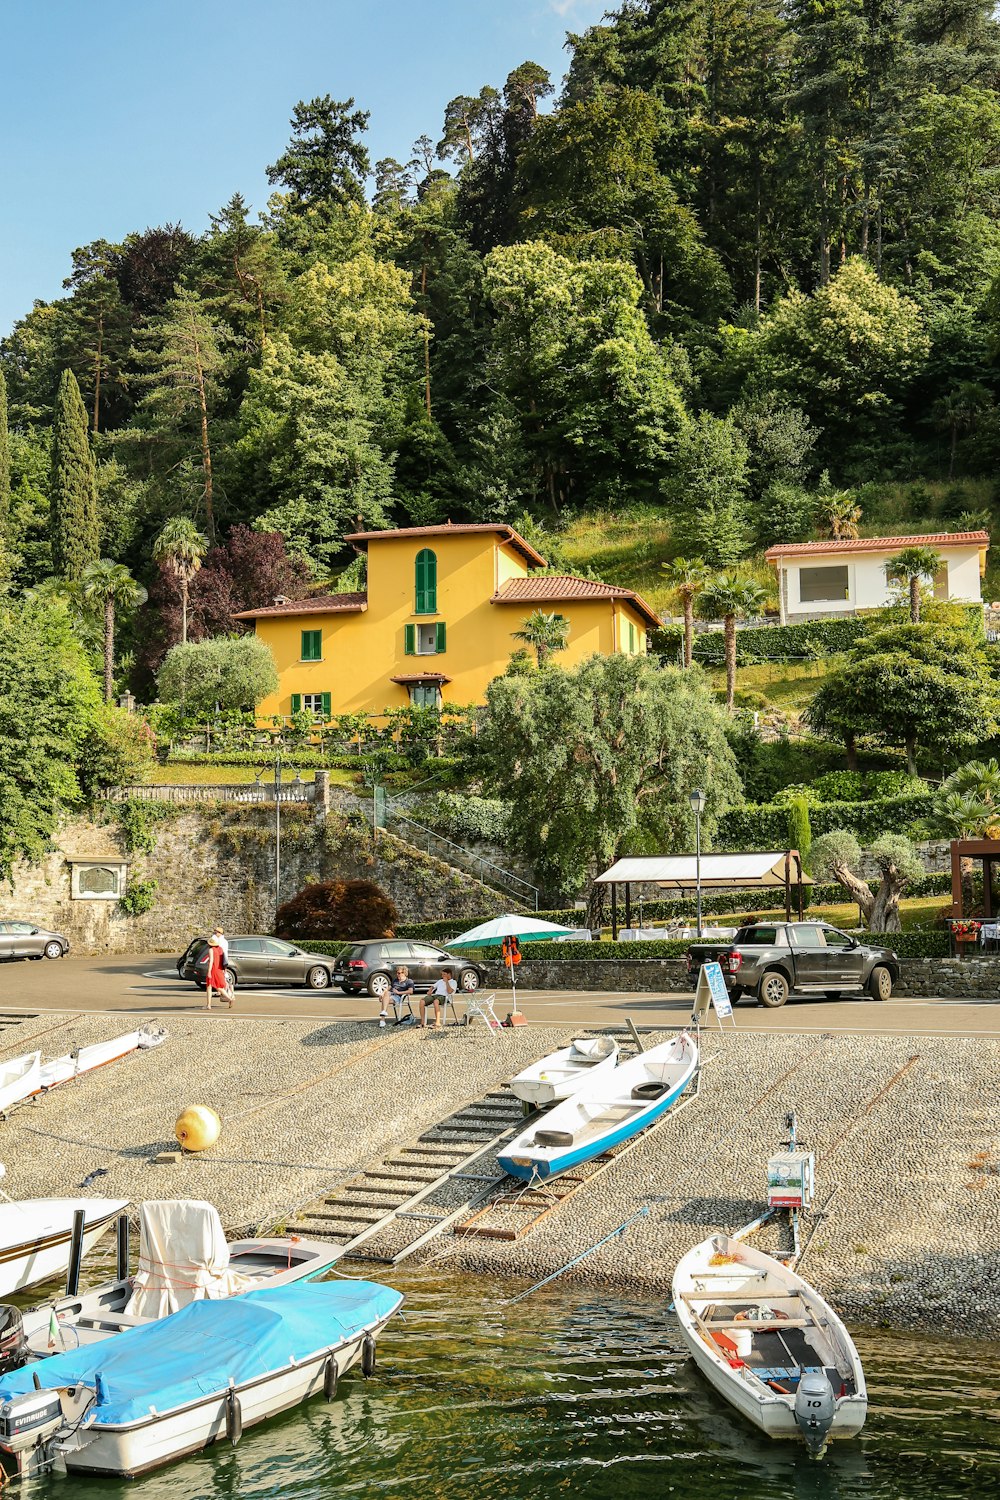 a group of boats parked on a beach next to a yellow house